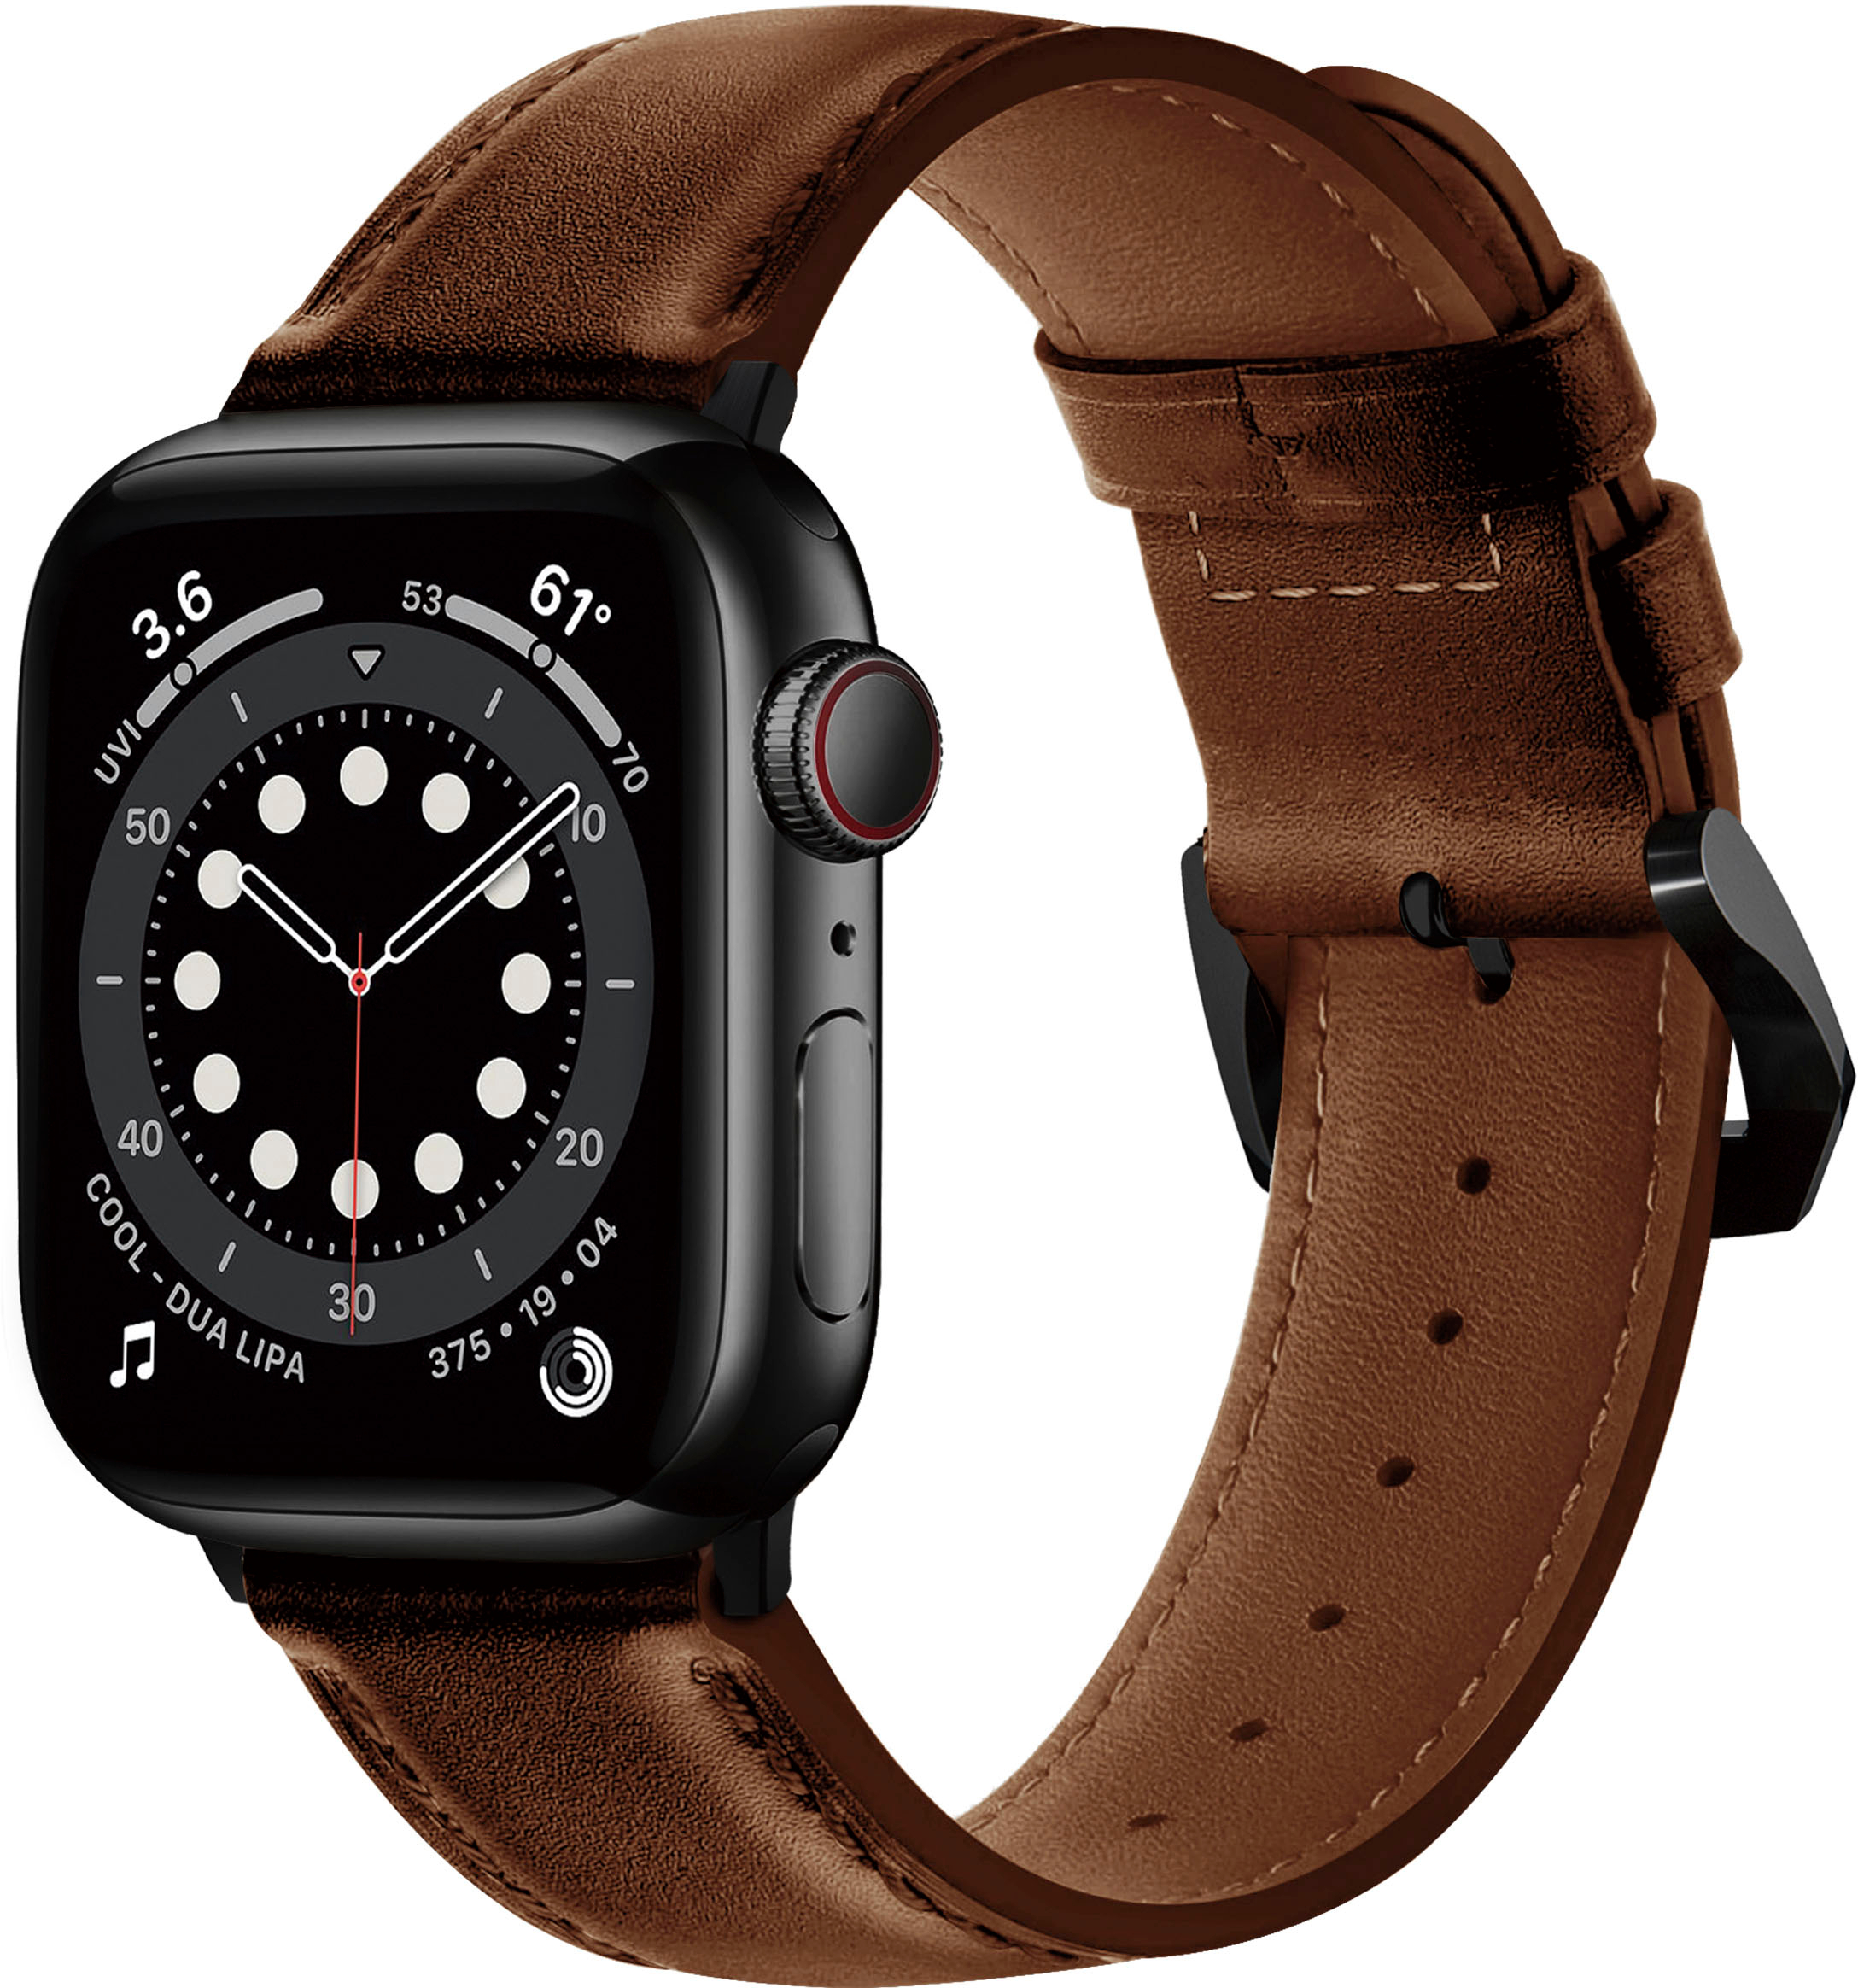 Angle View: WITHit - D Link Band for Apple Watch™ 38mm and 40mm - Gold